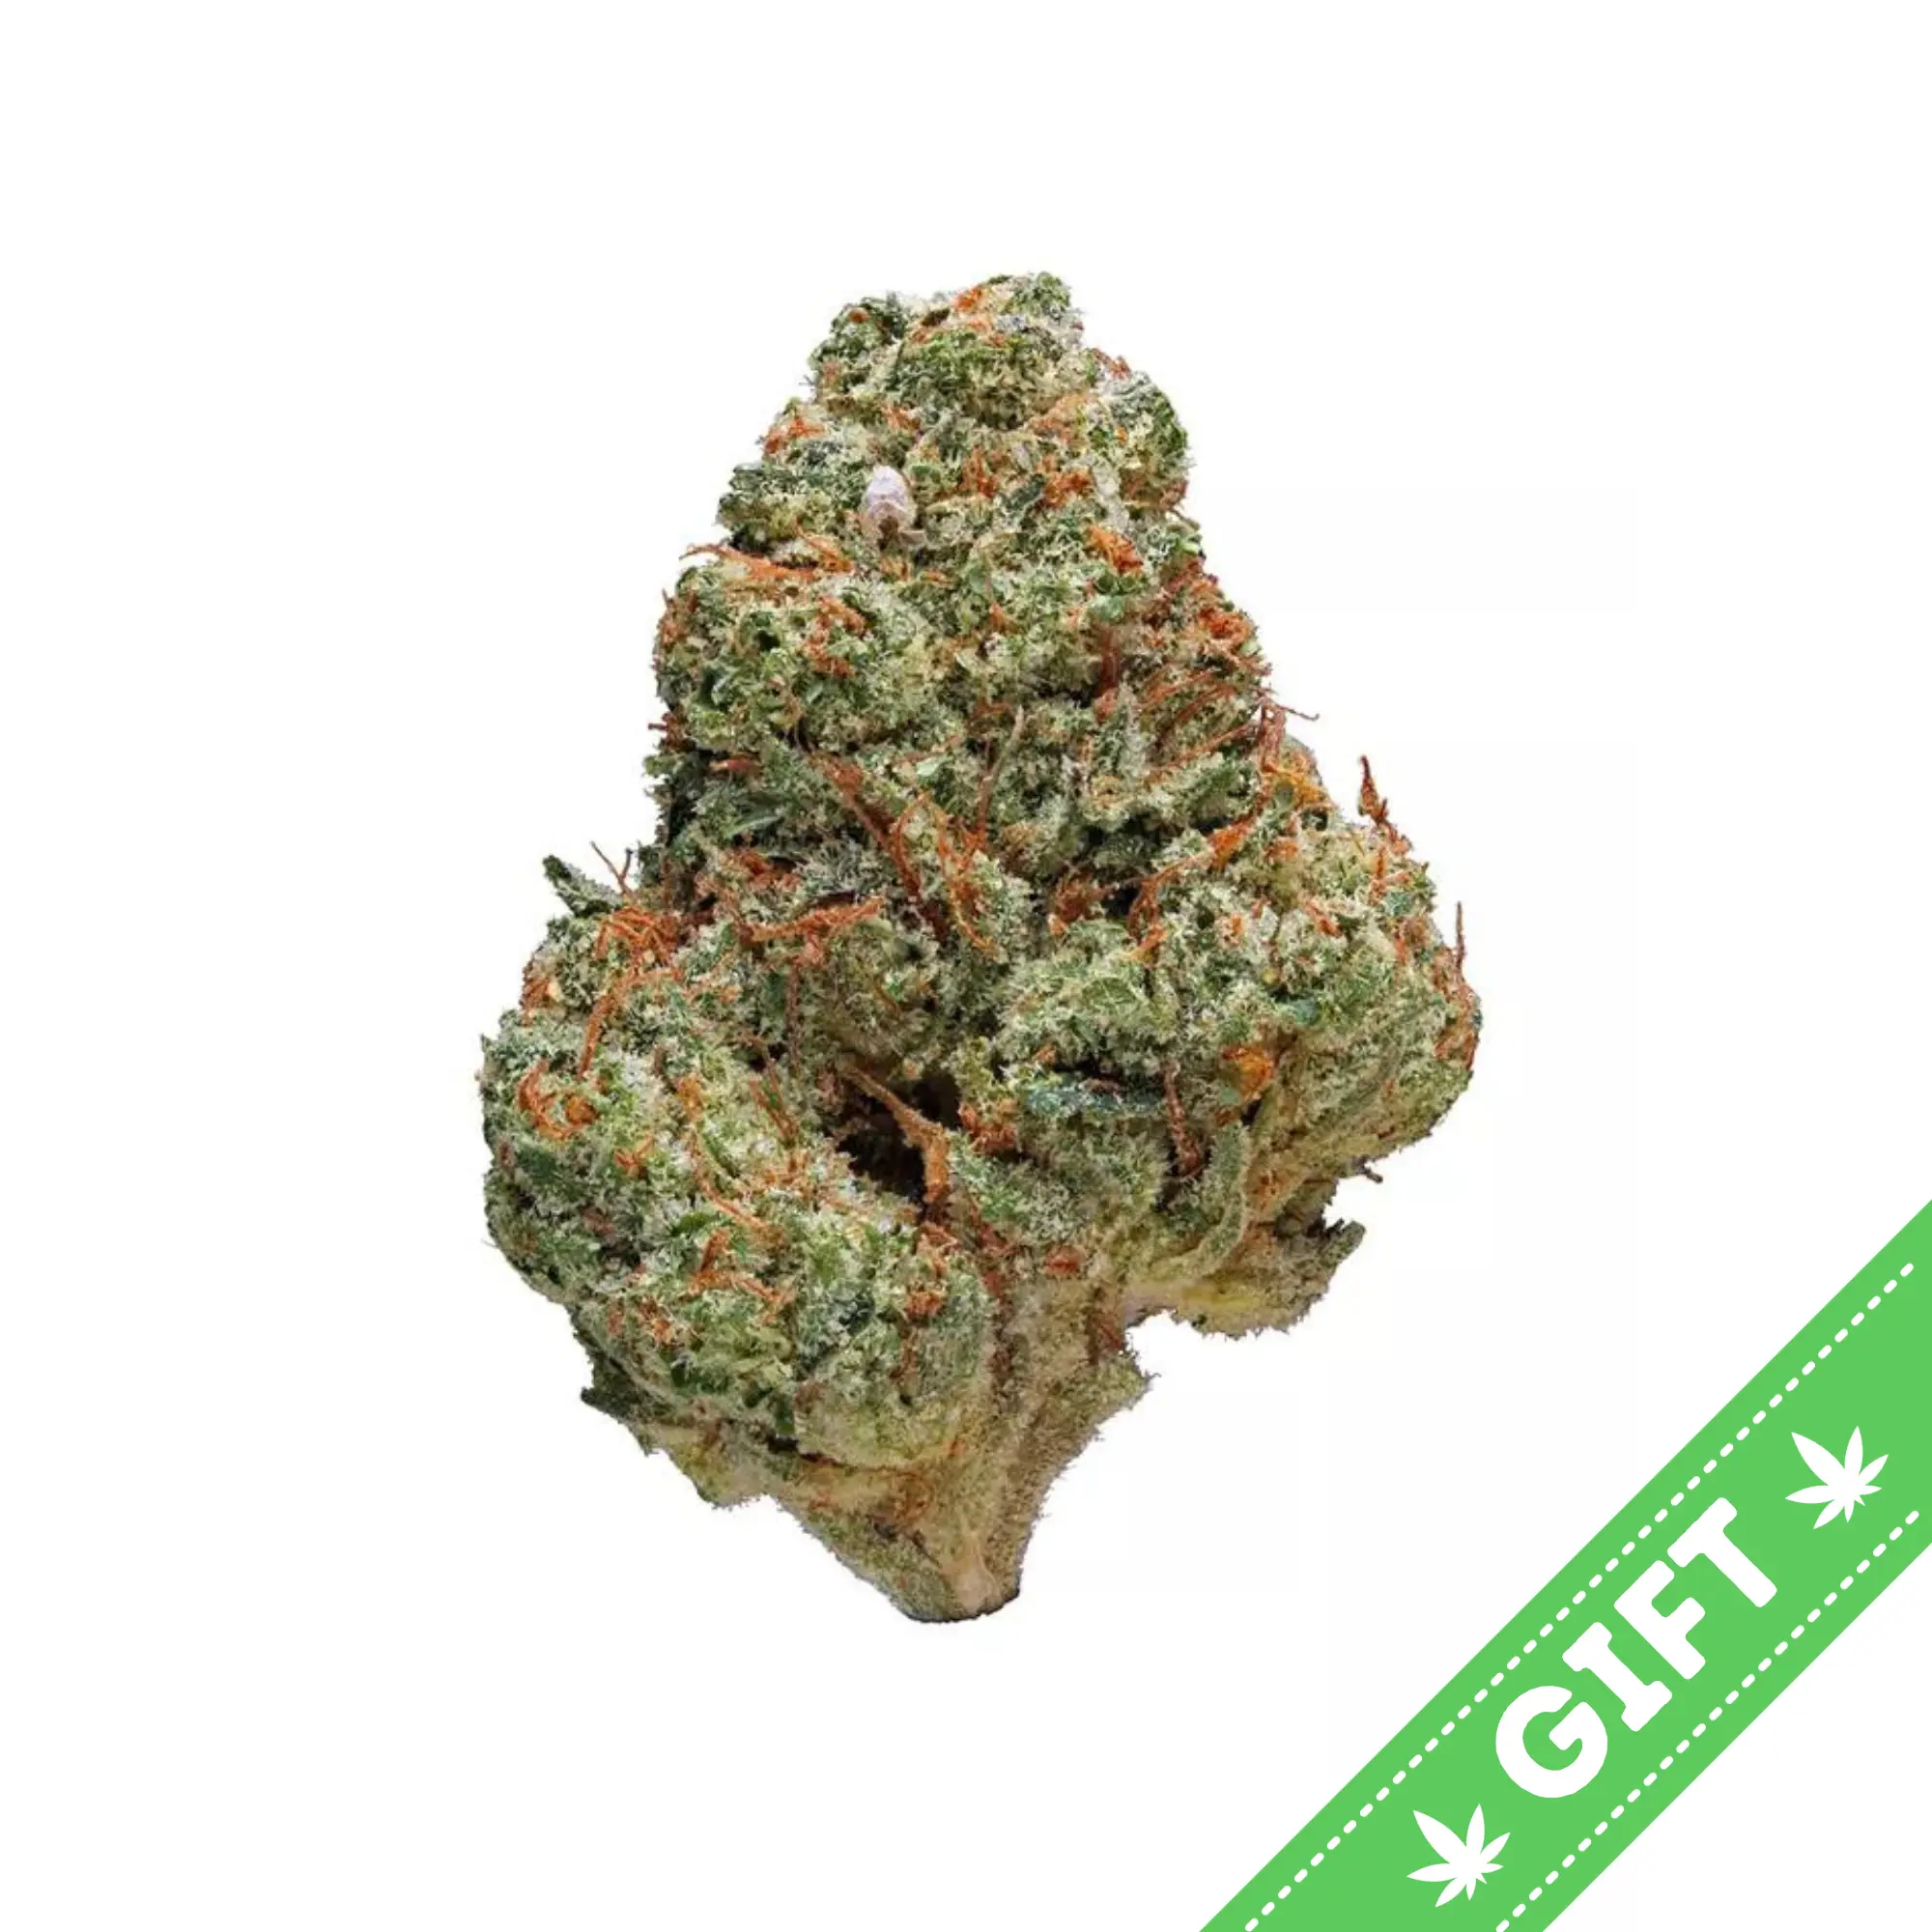 Giving Tree gifts Guava, a sativa dominant hybrid from the Cookies Fam, Guava is a Gelato phenotype.